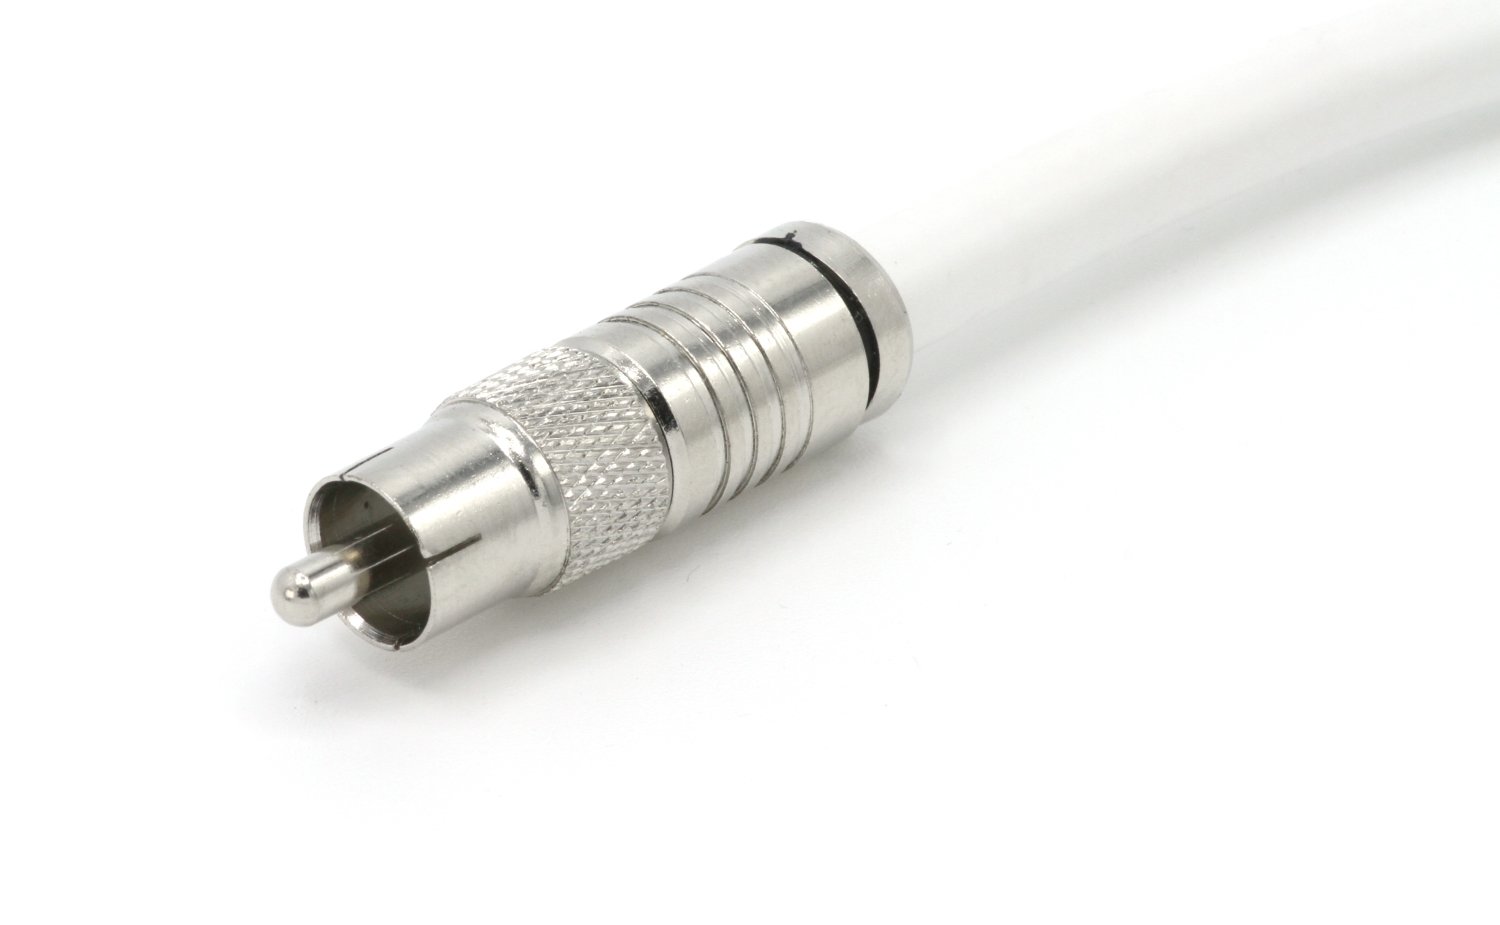 THE CIMPLE CO - White Digital Audio Coaxial Cable Subwoofer Cable - (S/PDIF) RCA Cable, 75 Feet - image 2 of 6